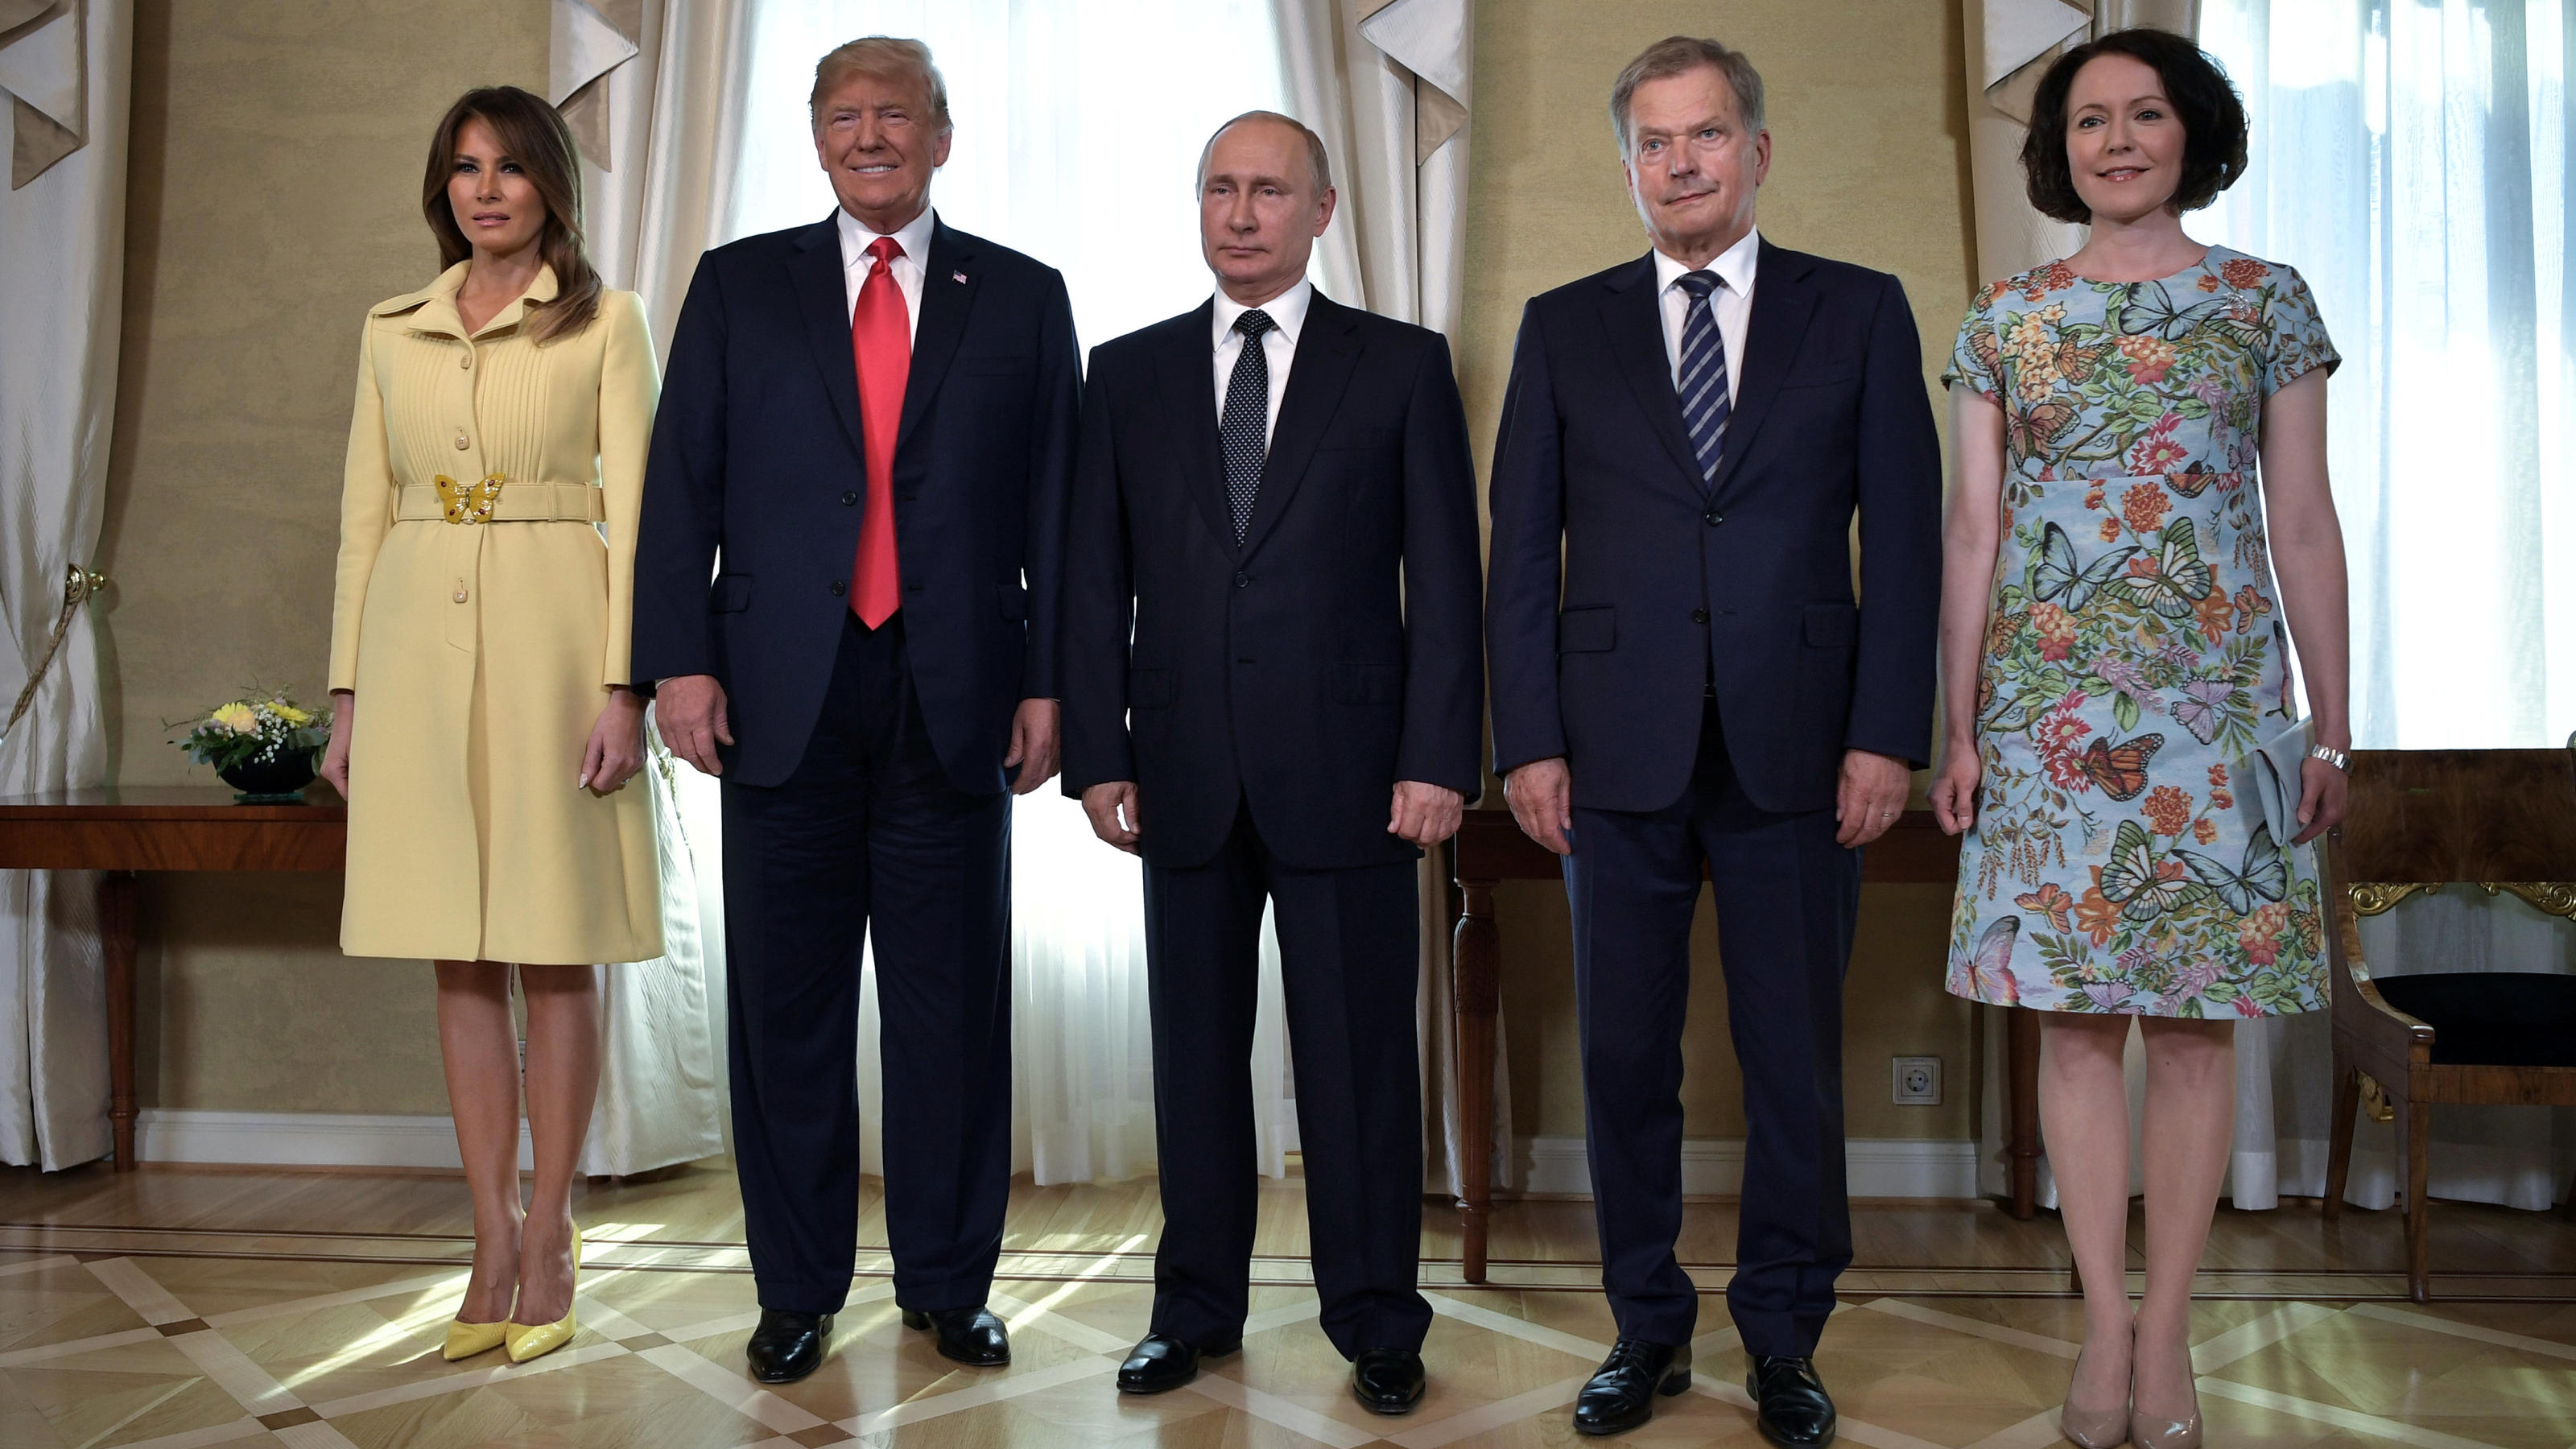 Russia's President Vladimir Putin (C), U.S. President Donald Trump (2nd L), First lady Melania Trump (L), Finland's President Sauli Niinisto (2nd R) and his wife Jenni Haukio apose for a picture during a meeting in Helsinki, Finland July 16, 2018. Sp